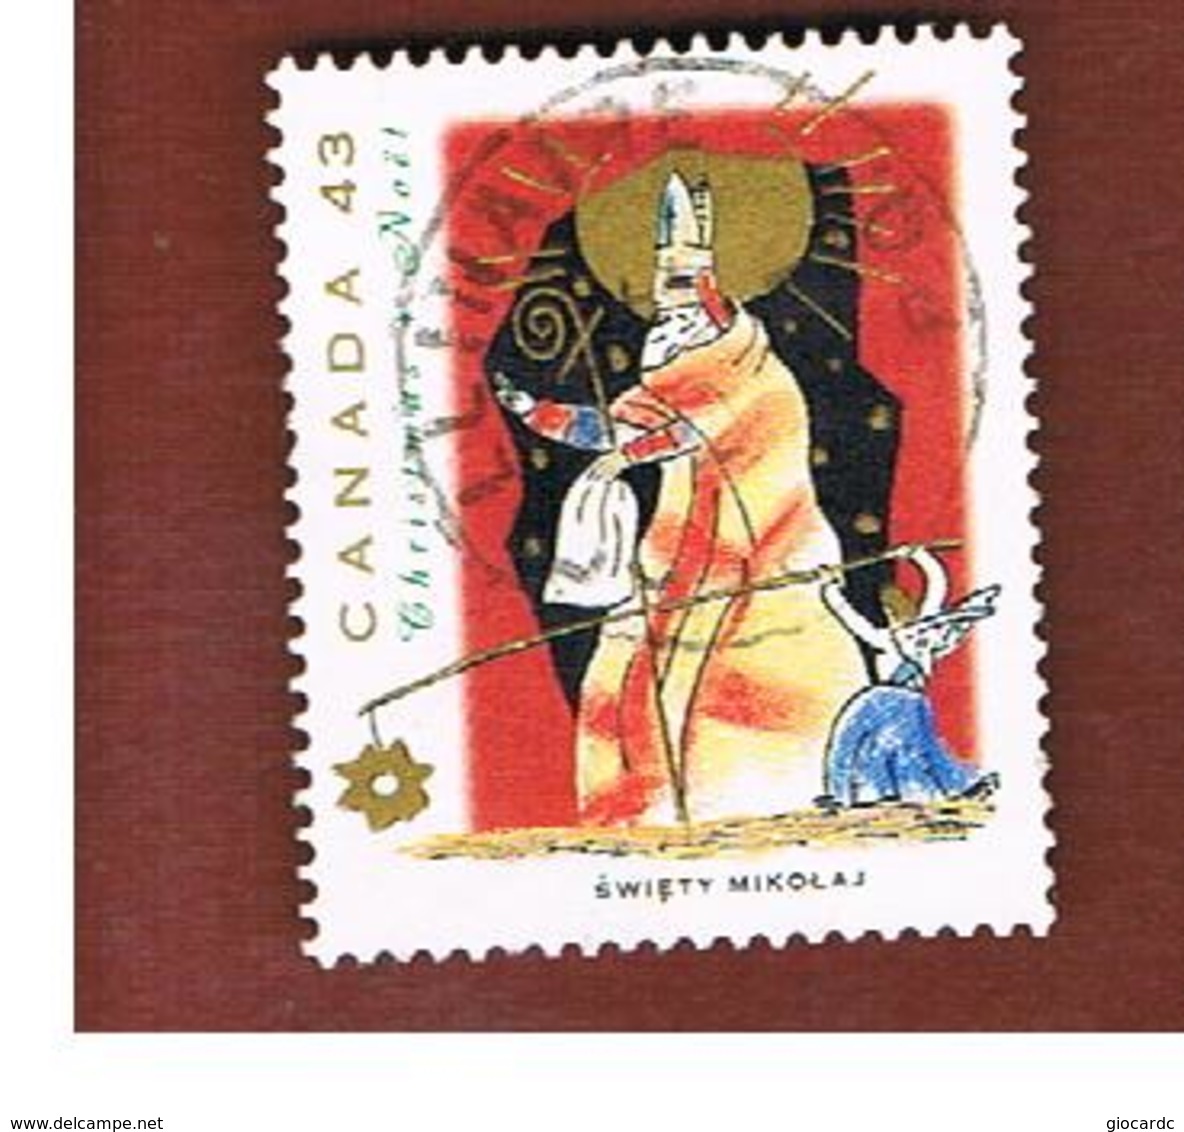 CANADA - SG 1573 - 1993  CHRISTMAS: SANTA CLAUS  -  USED - Used Stamps